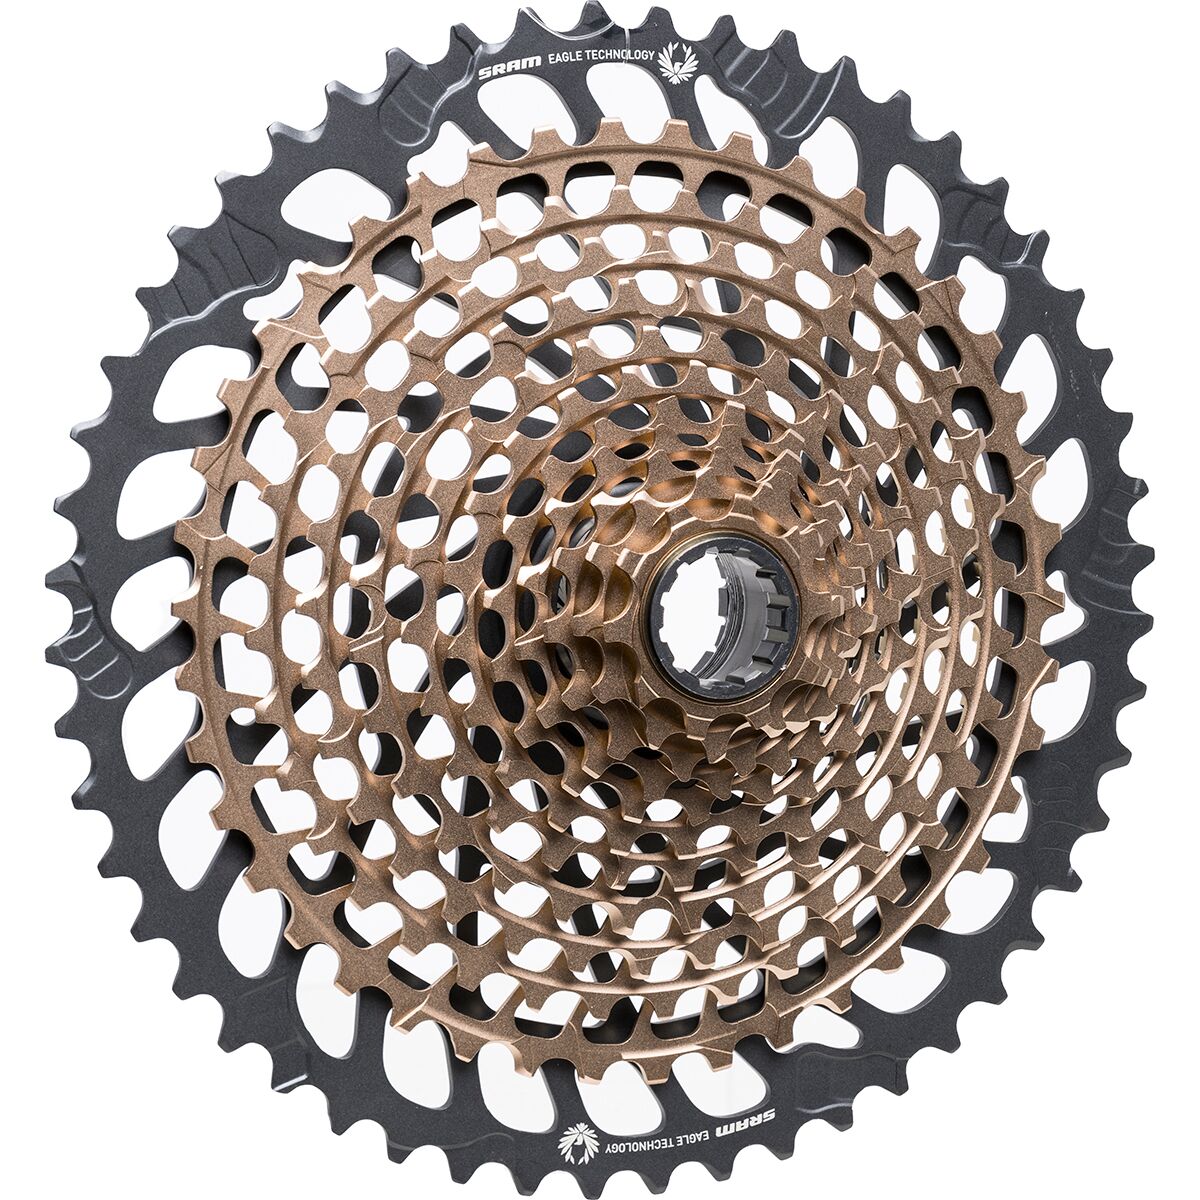 SRAM XX1 Eagle 12-Speed Cassette - Components